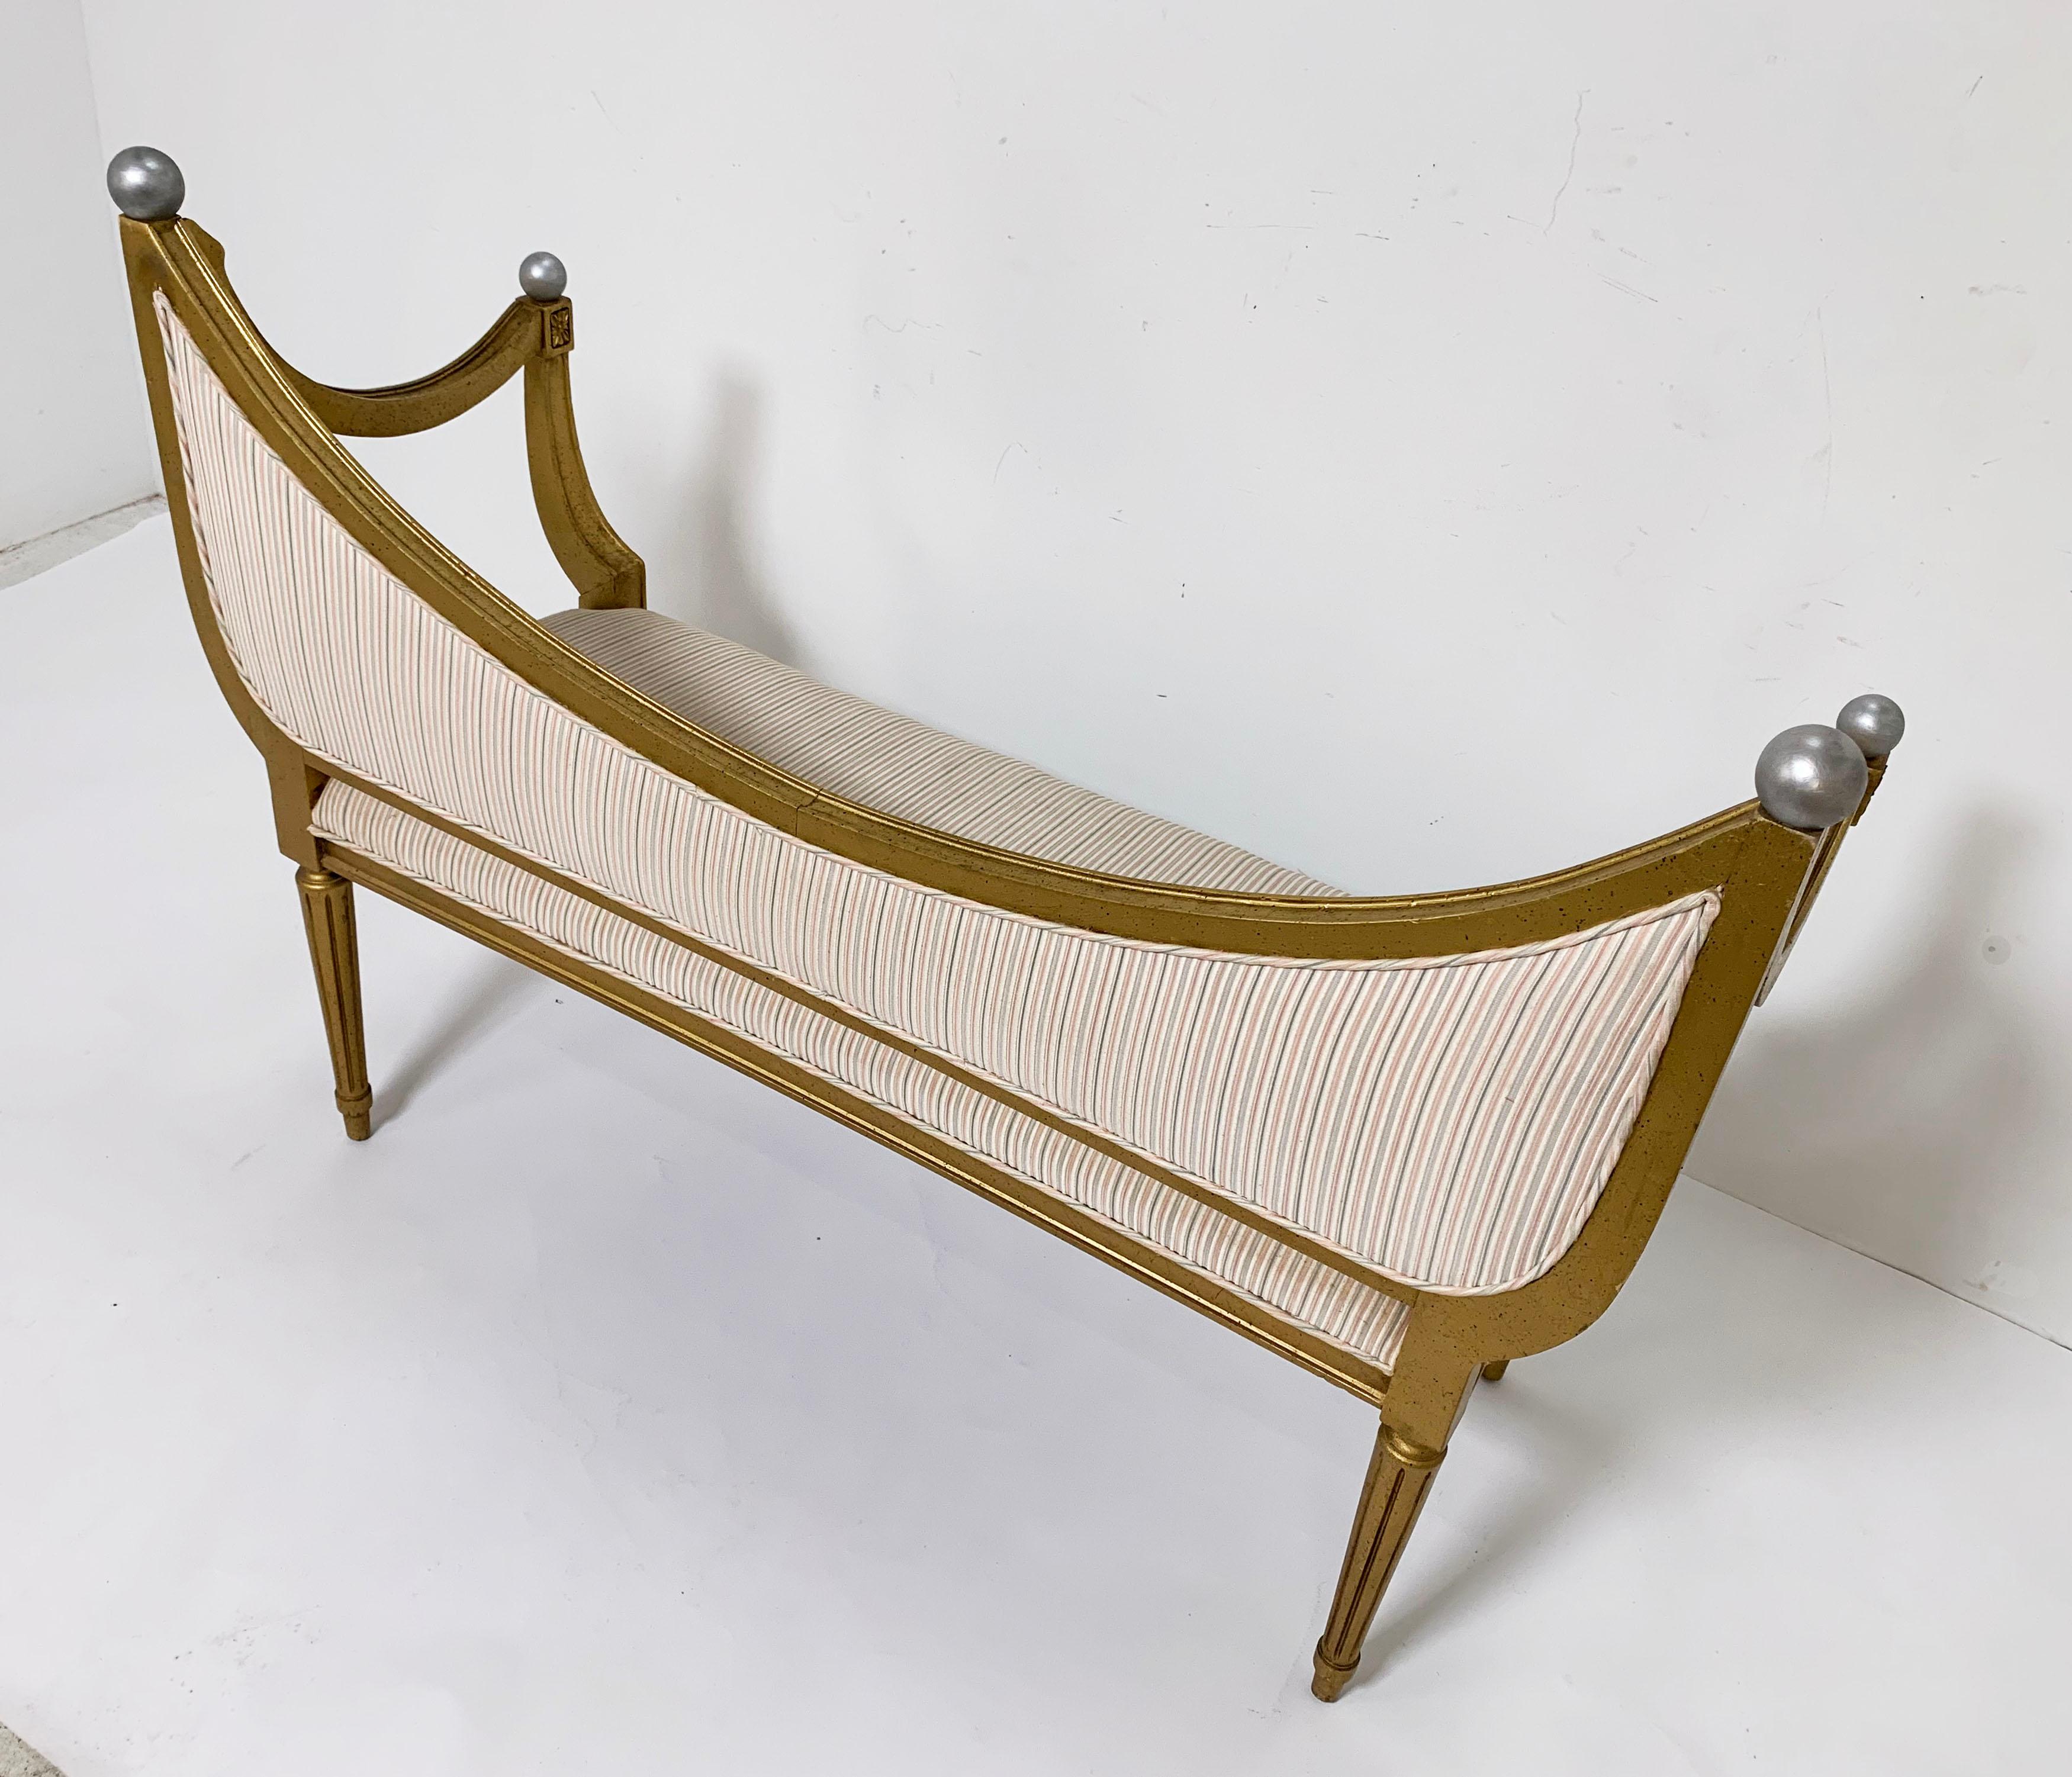 Midcentury Giltwood Settee Bench in the Neoclassical Style, circa 1960s 3